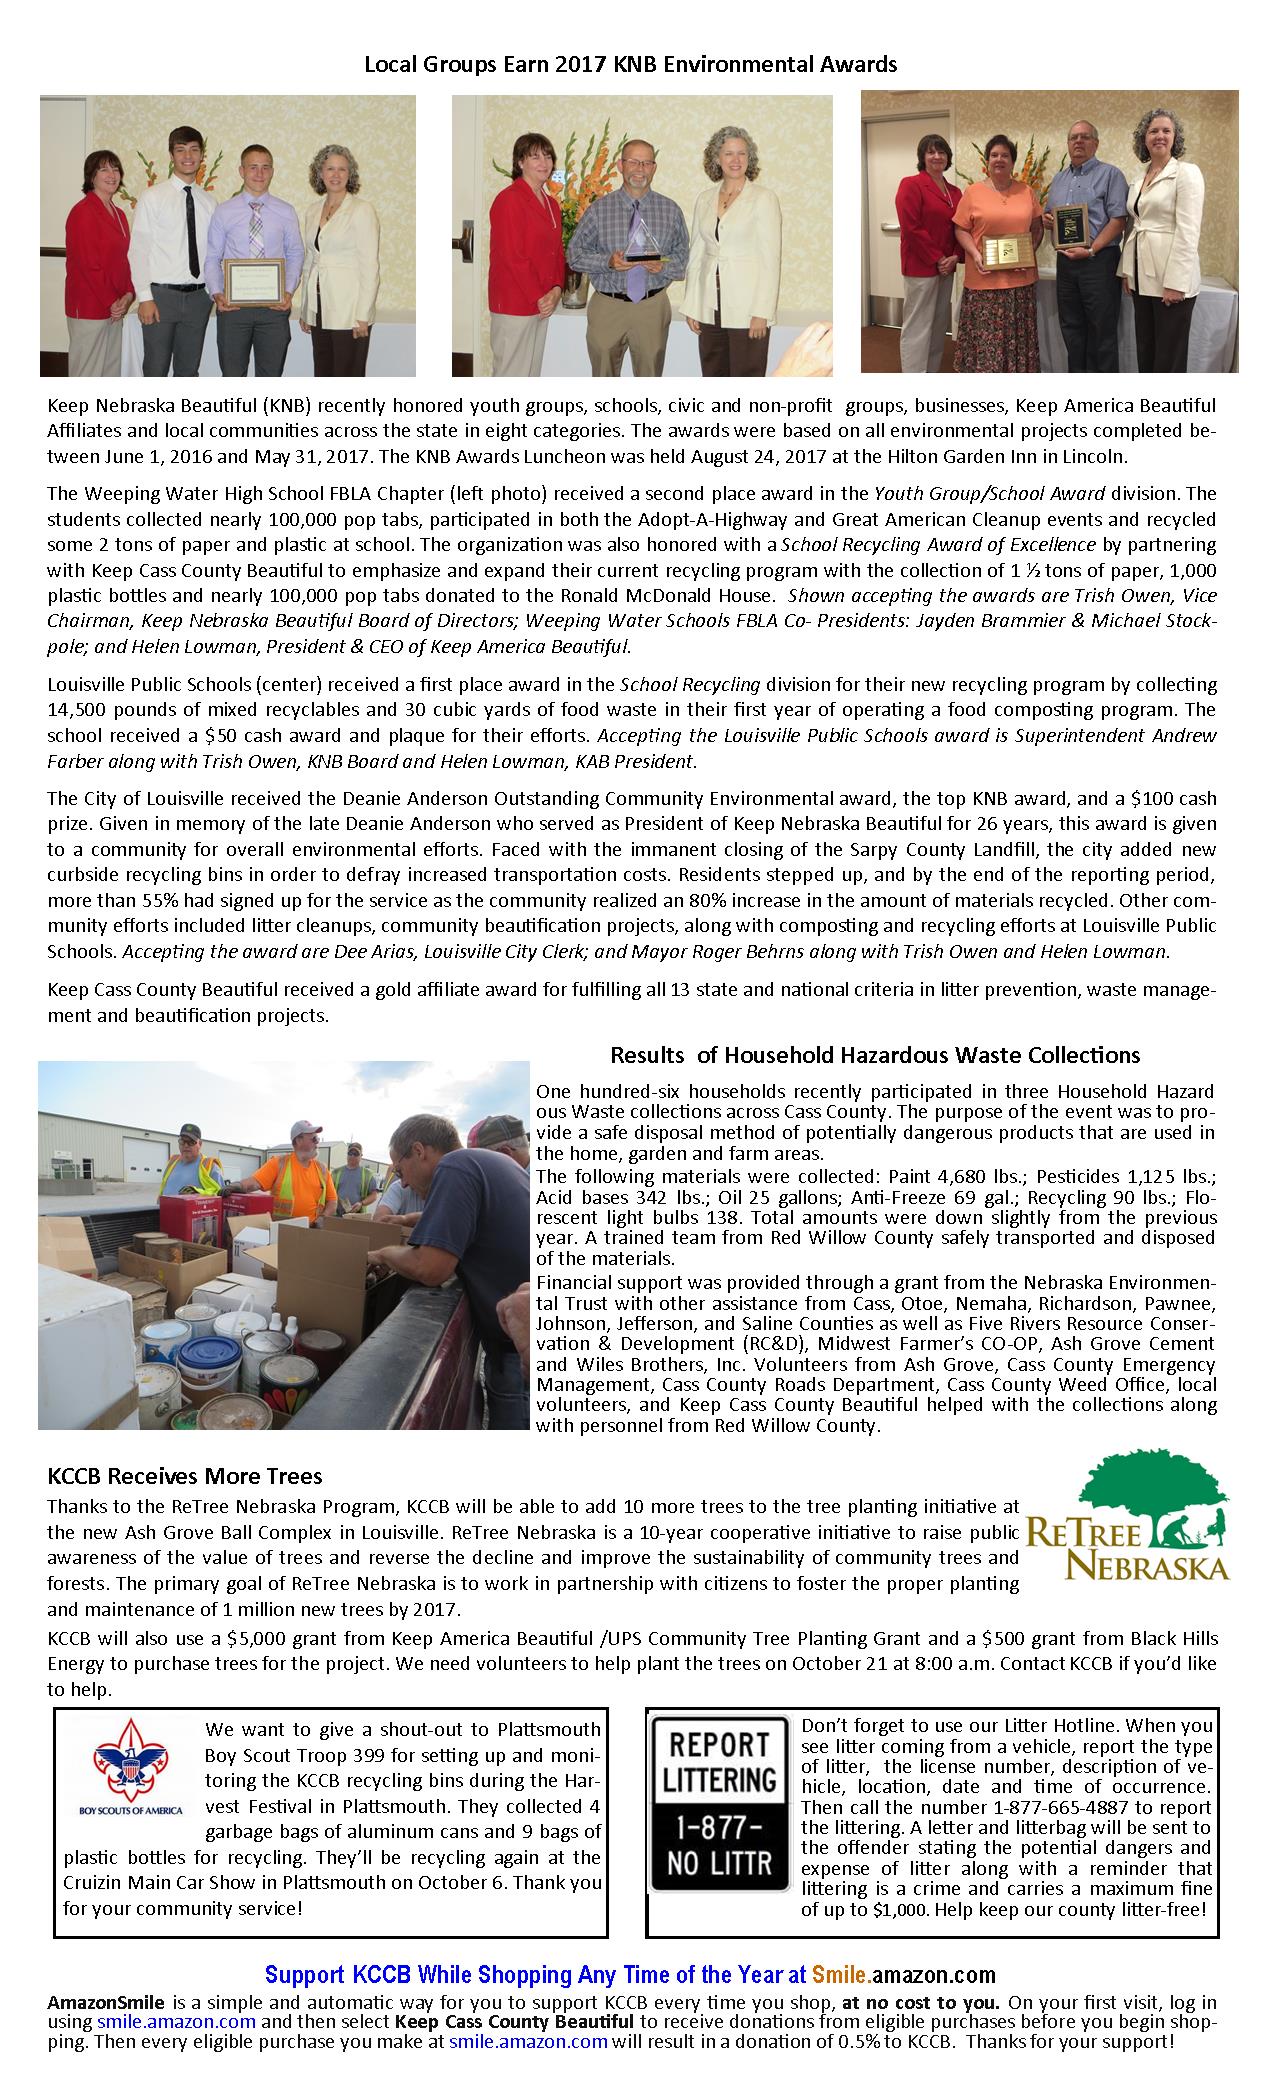 KCCB Newsletter page 2